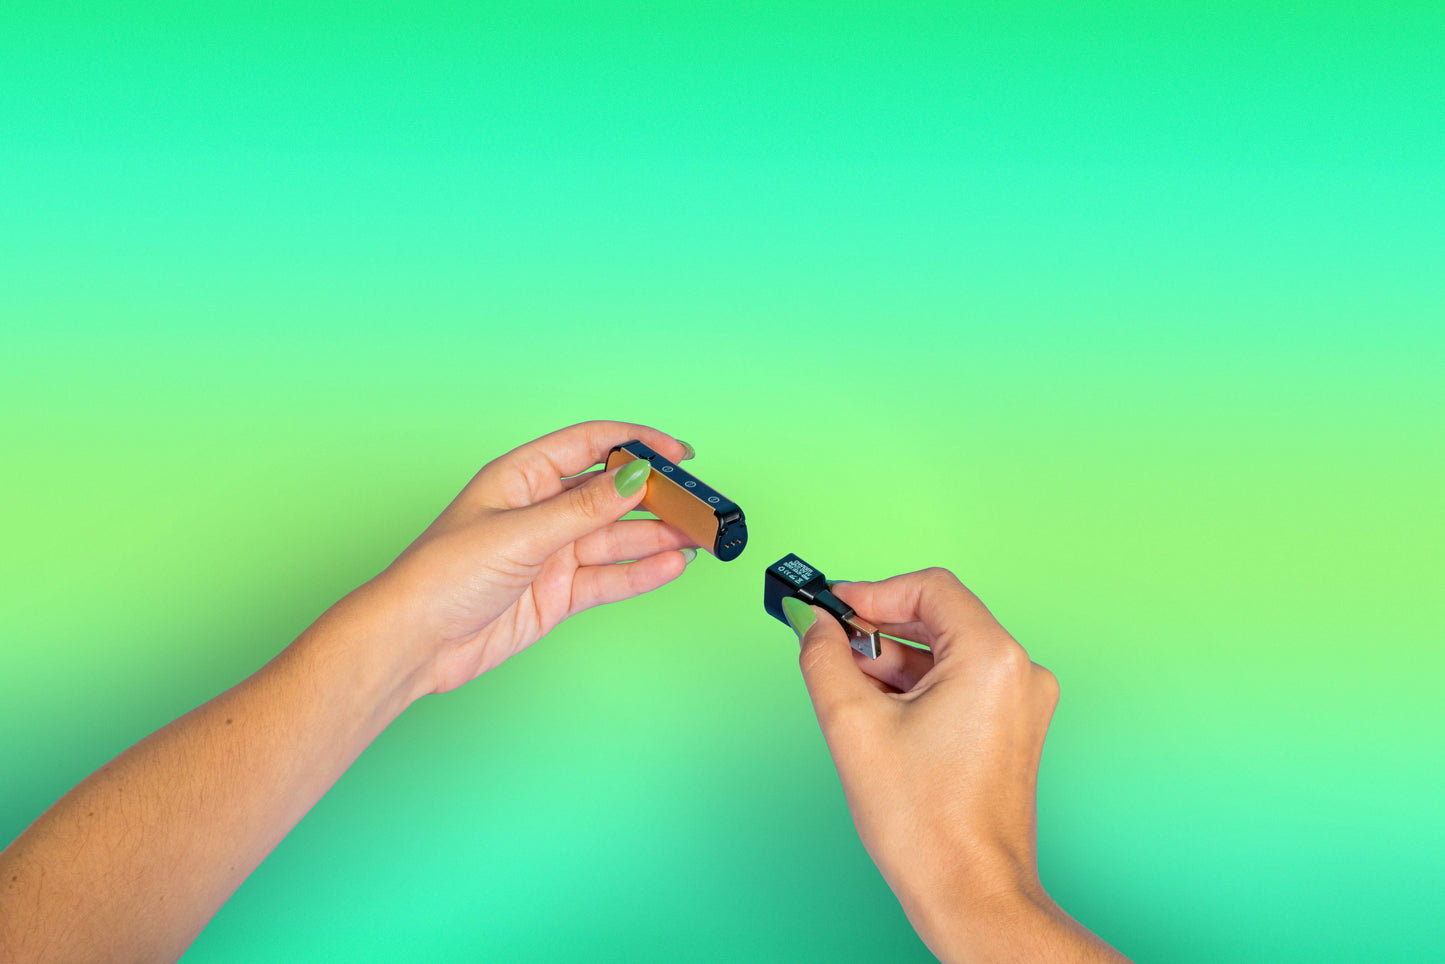 A girl with green nails connects the magnetic charger to the base of an Ooze Novex